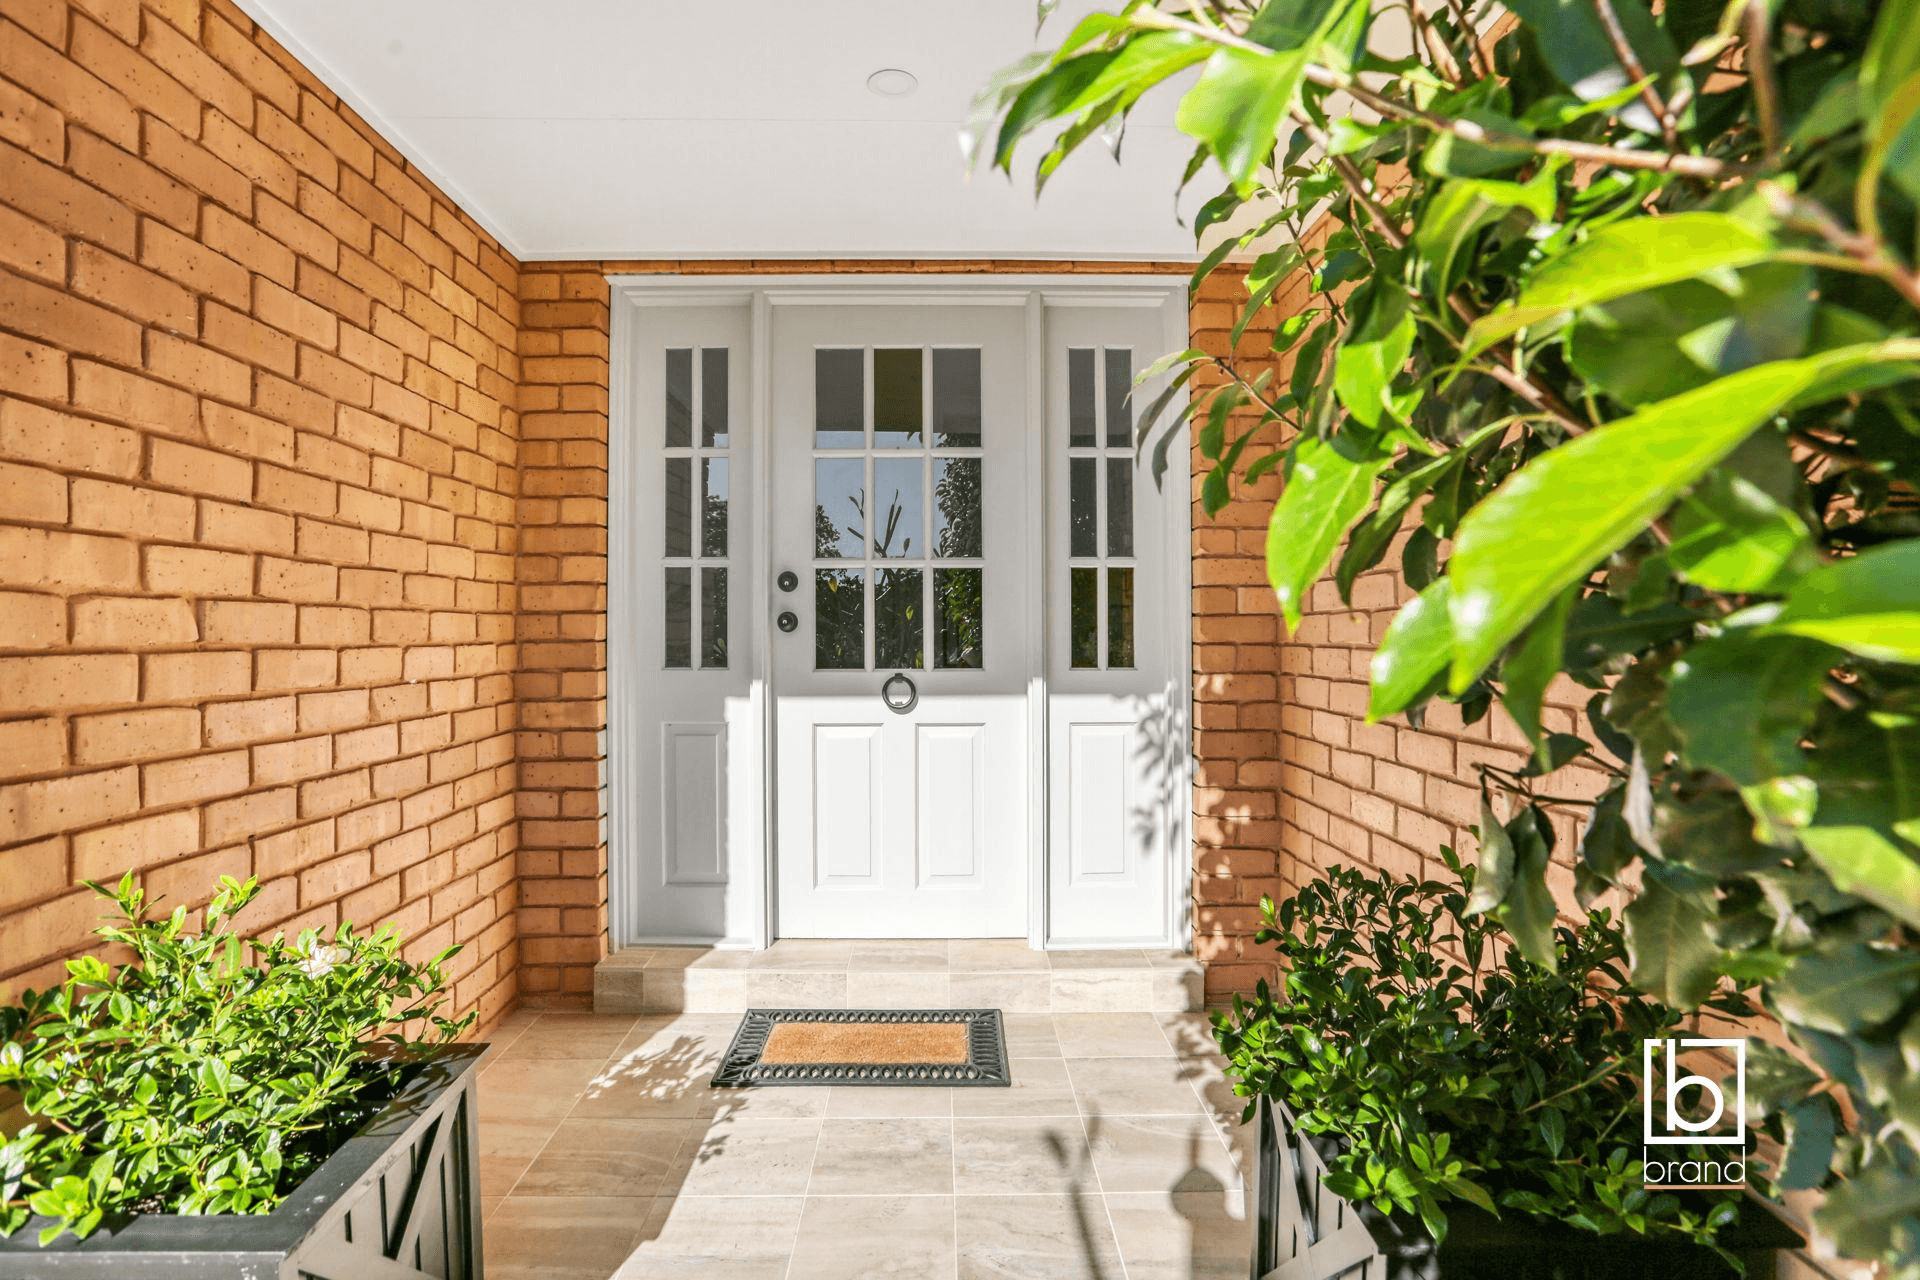 2/14 Sotherby Avenue, TERRIGAL, NSW 2260